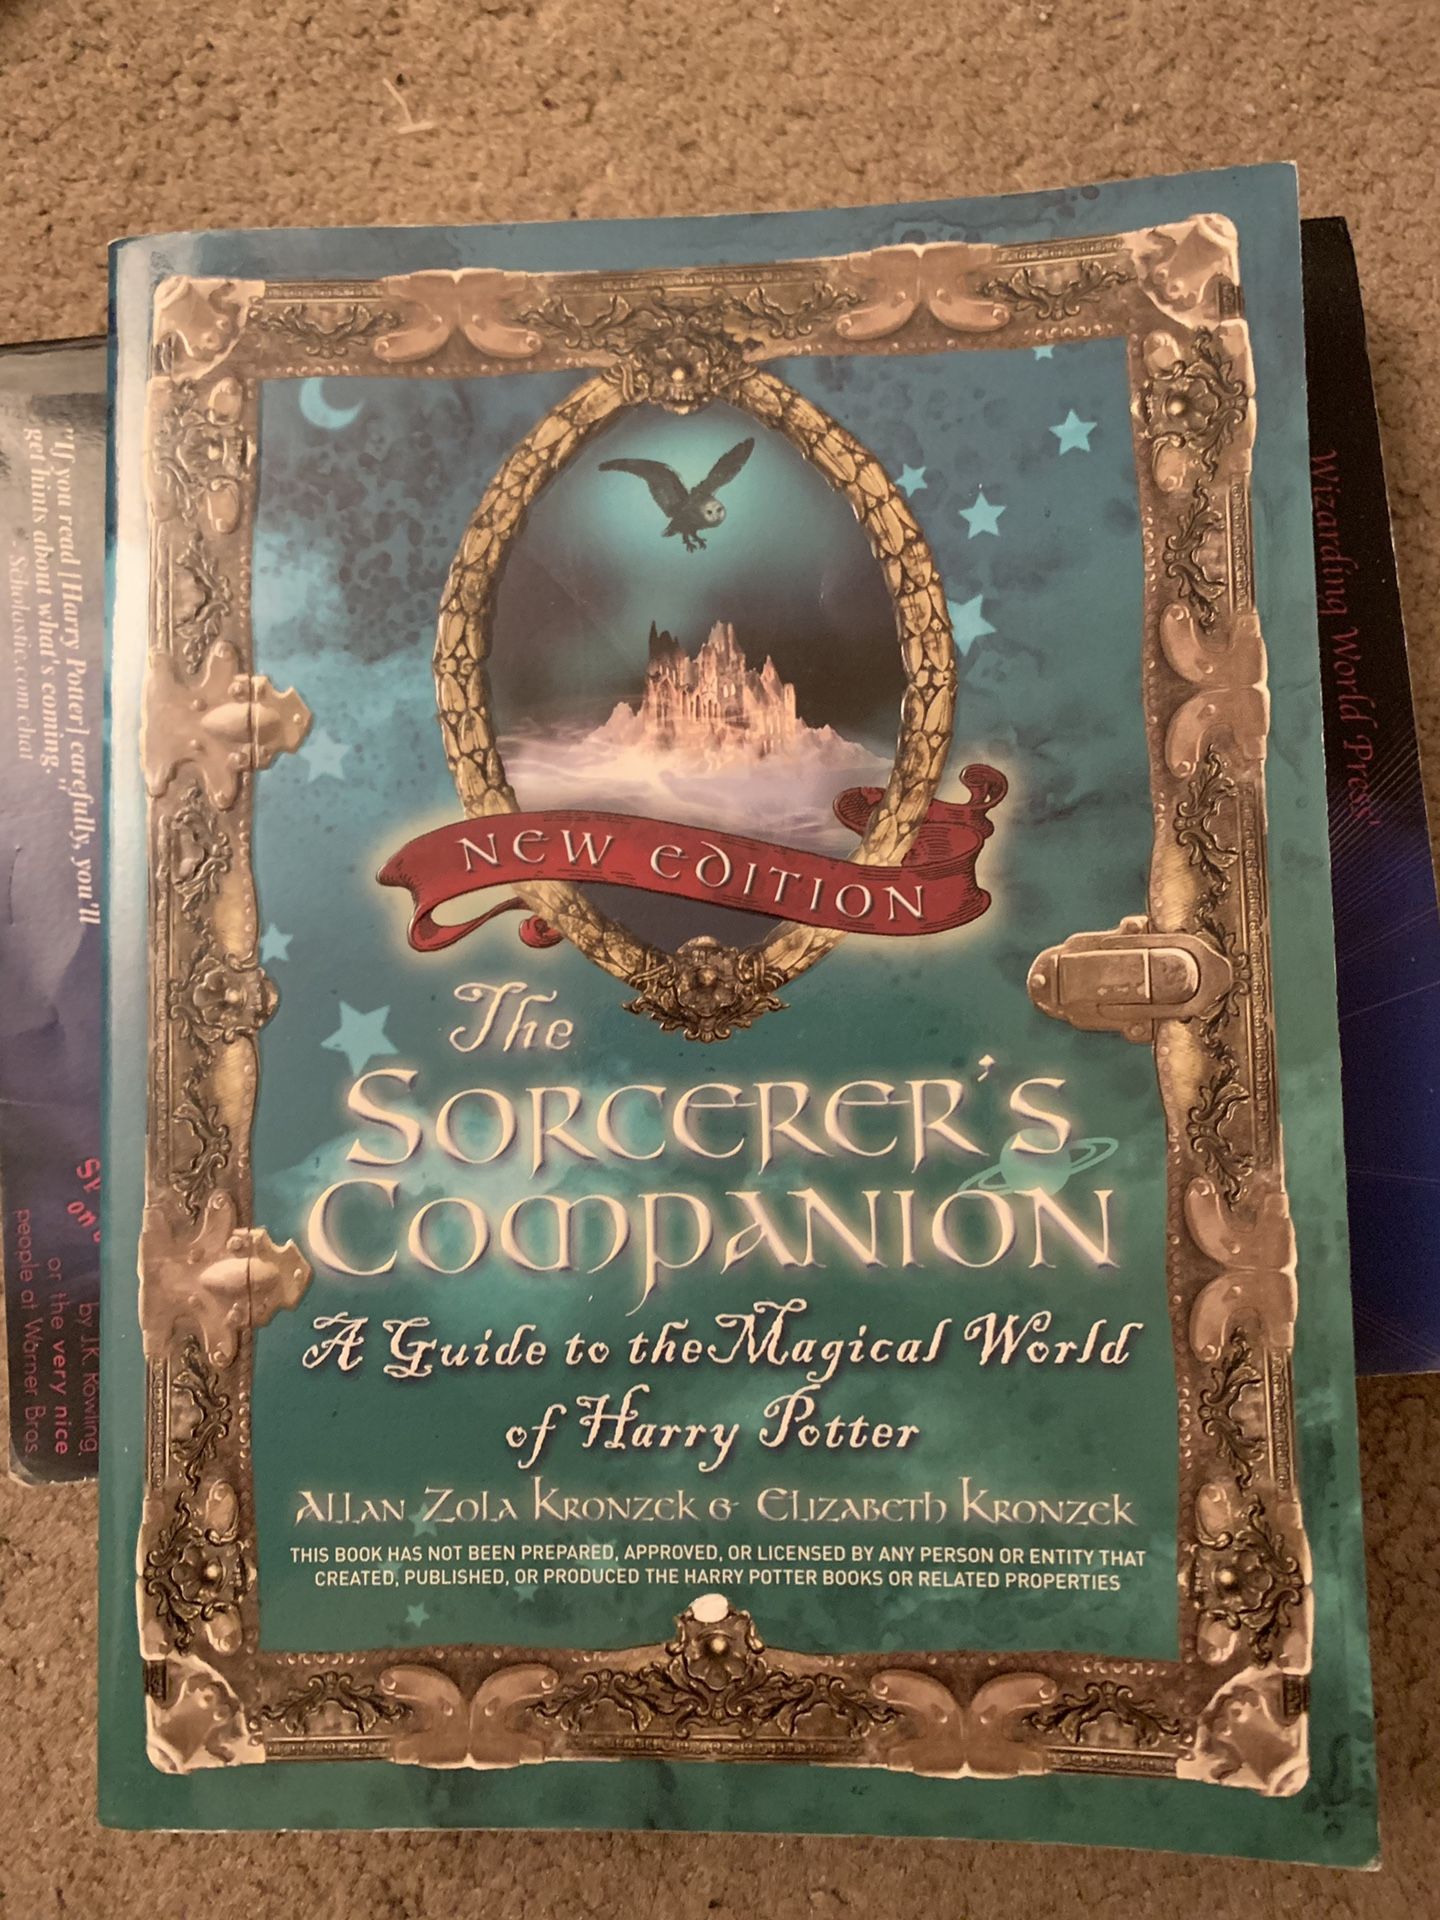 “The Sorcerer’s Companion: A Guide to the Magical World of Harry Potter”